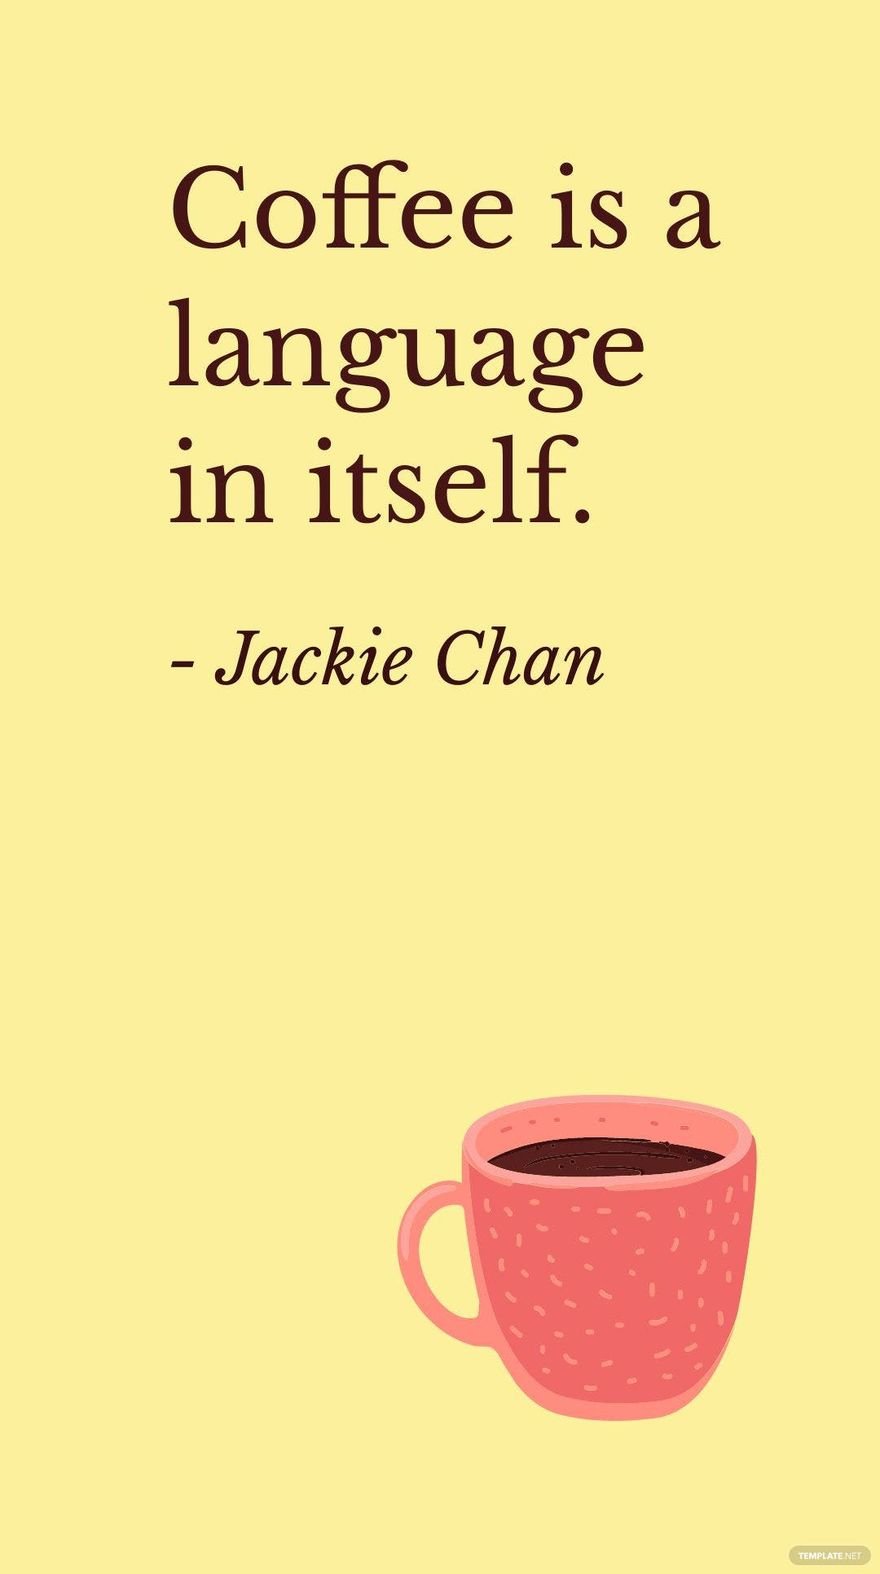 Jackie Chan - Coffee is a language in itself. in JPG